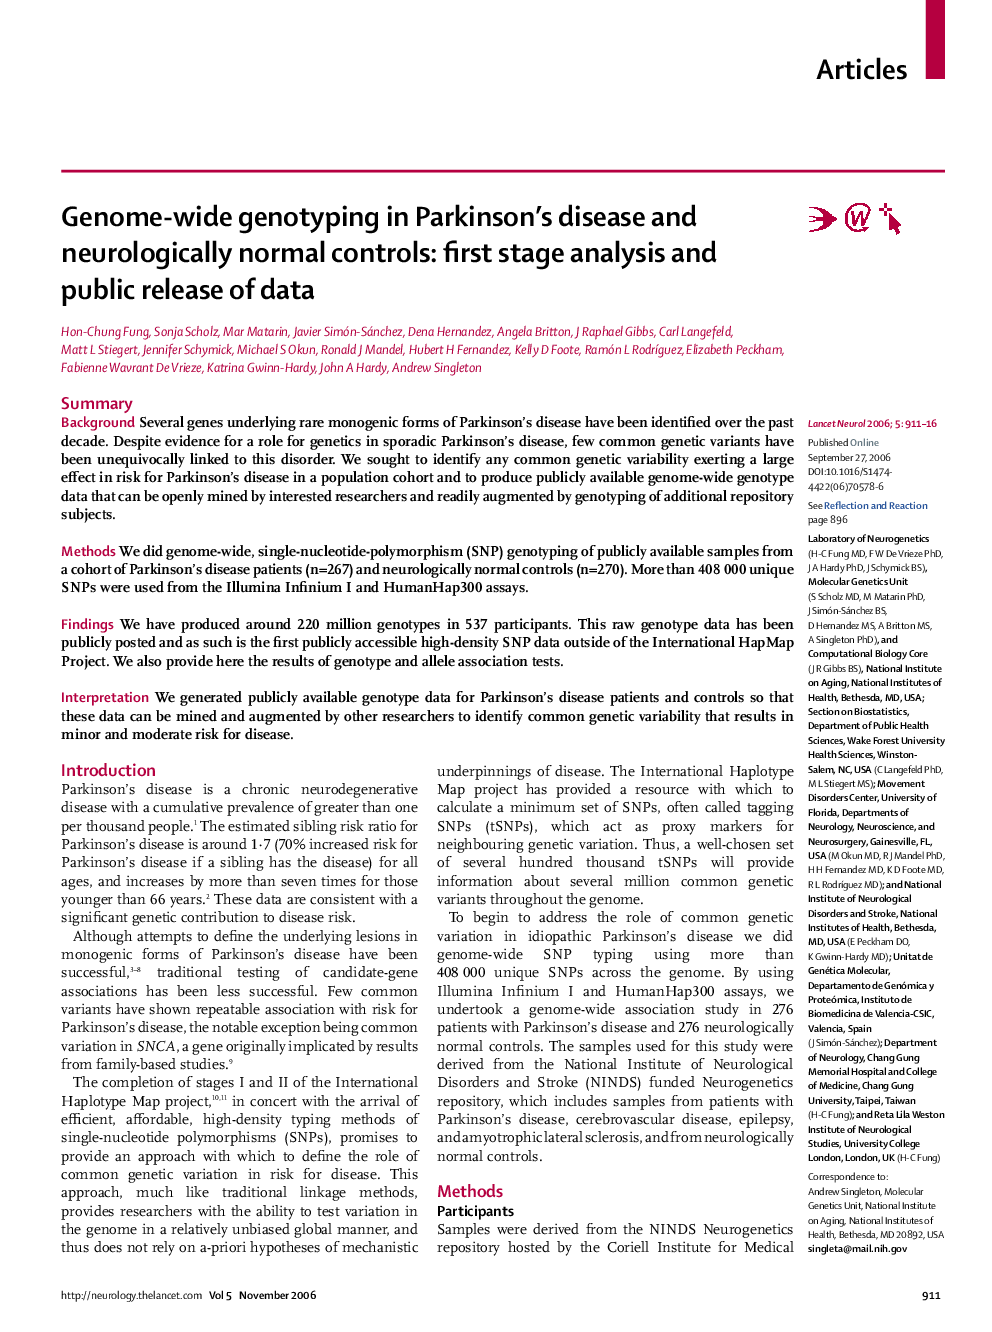 Genome-wide genotyping in Parkinson's disease and neurologically normal controls: first stage analysis and public release of data